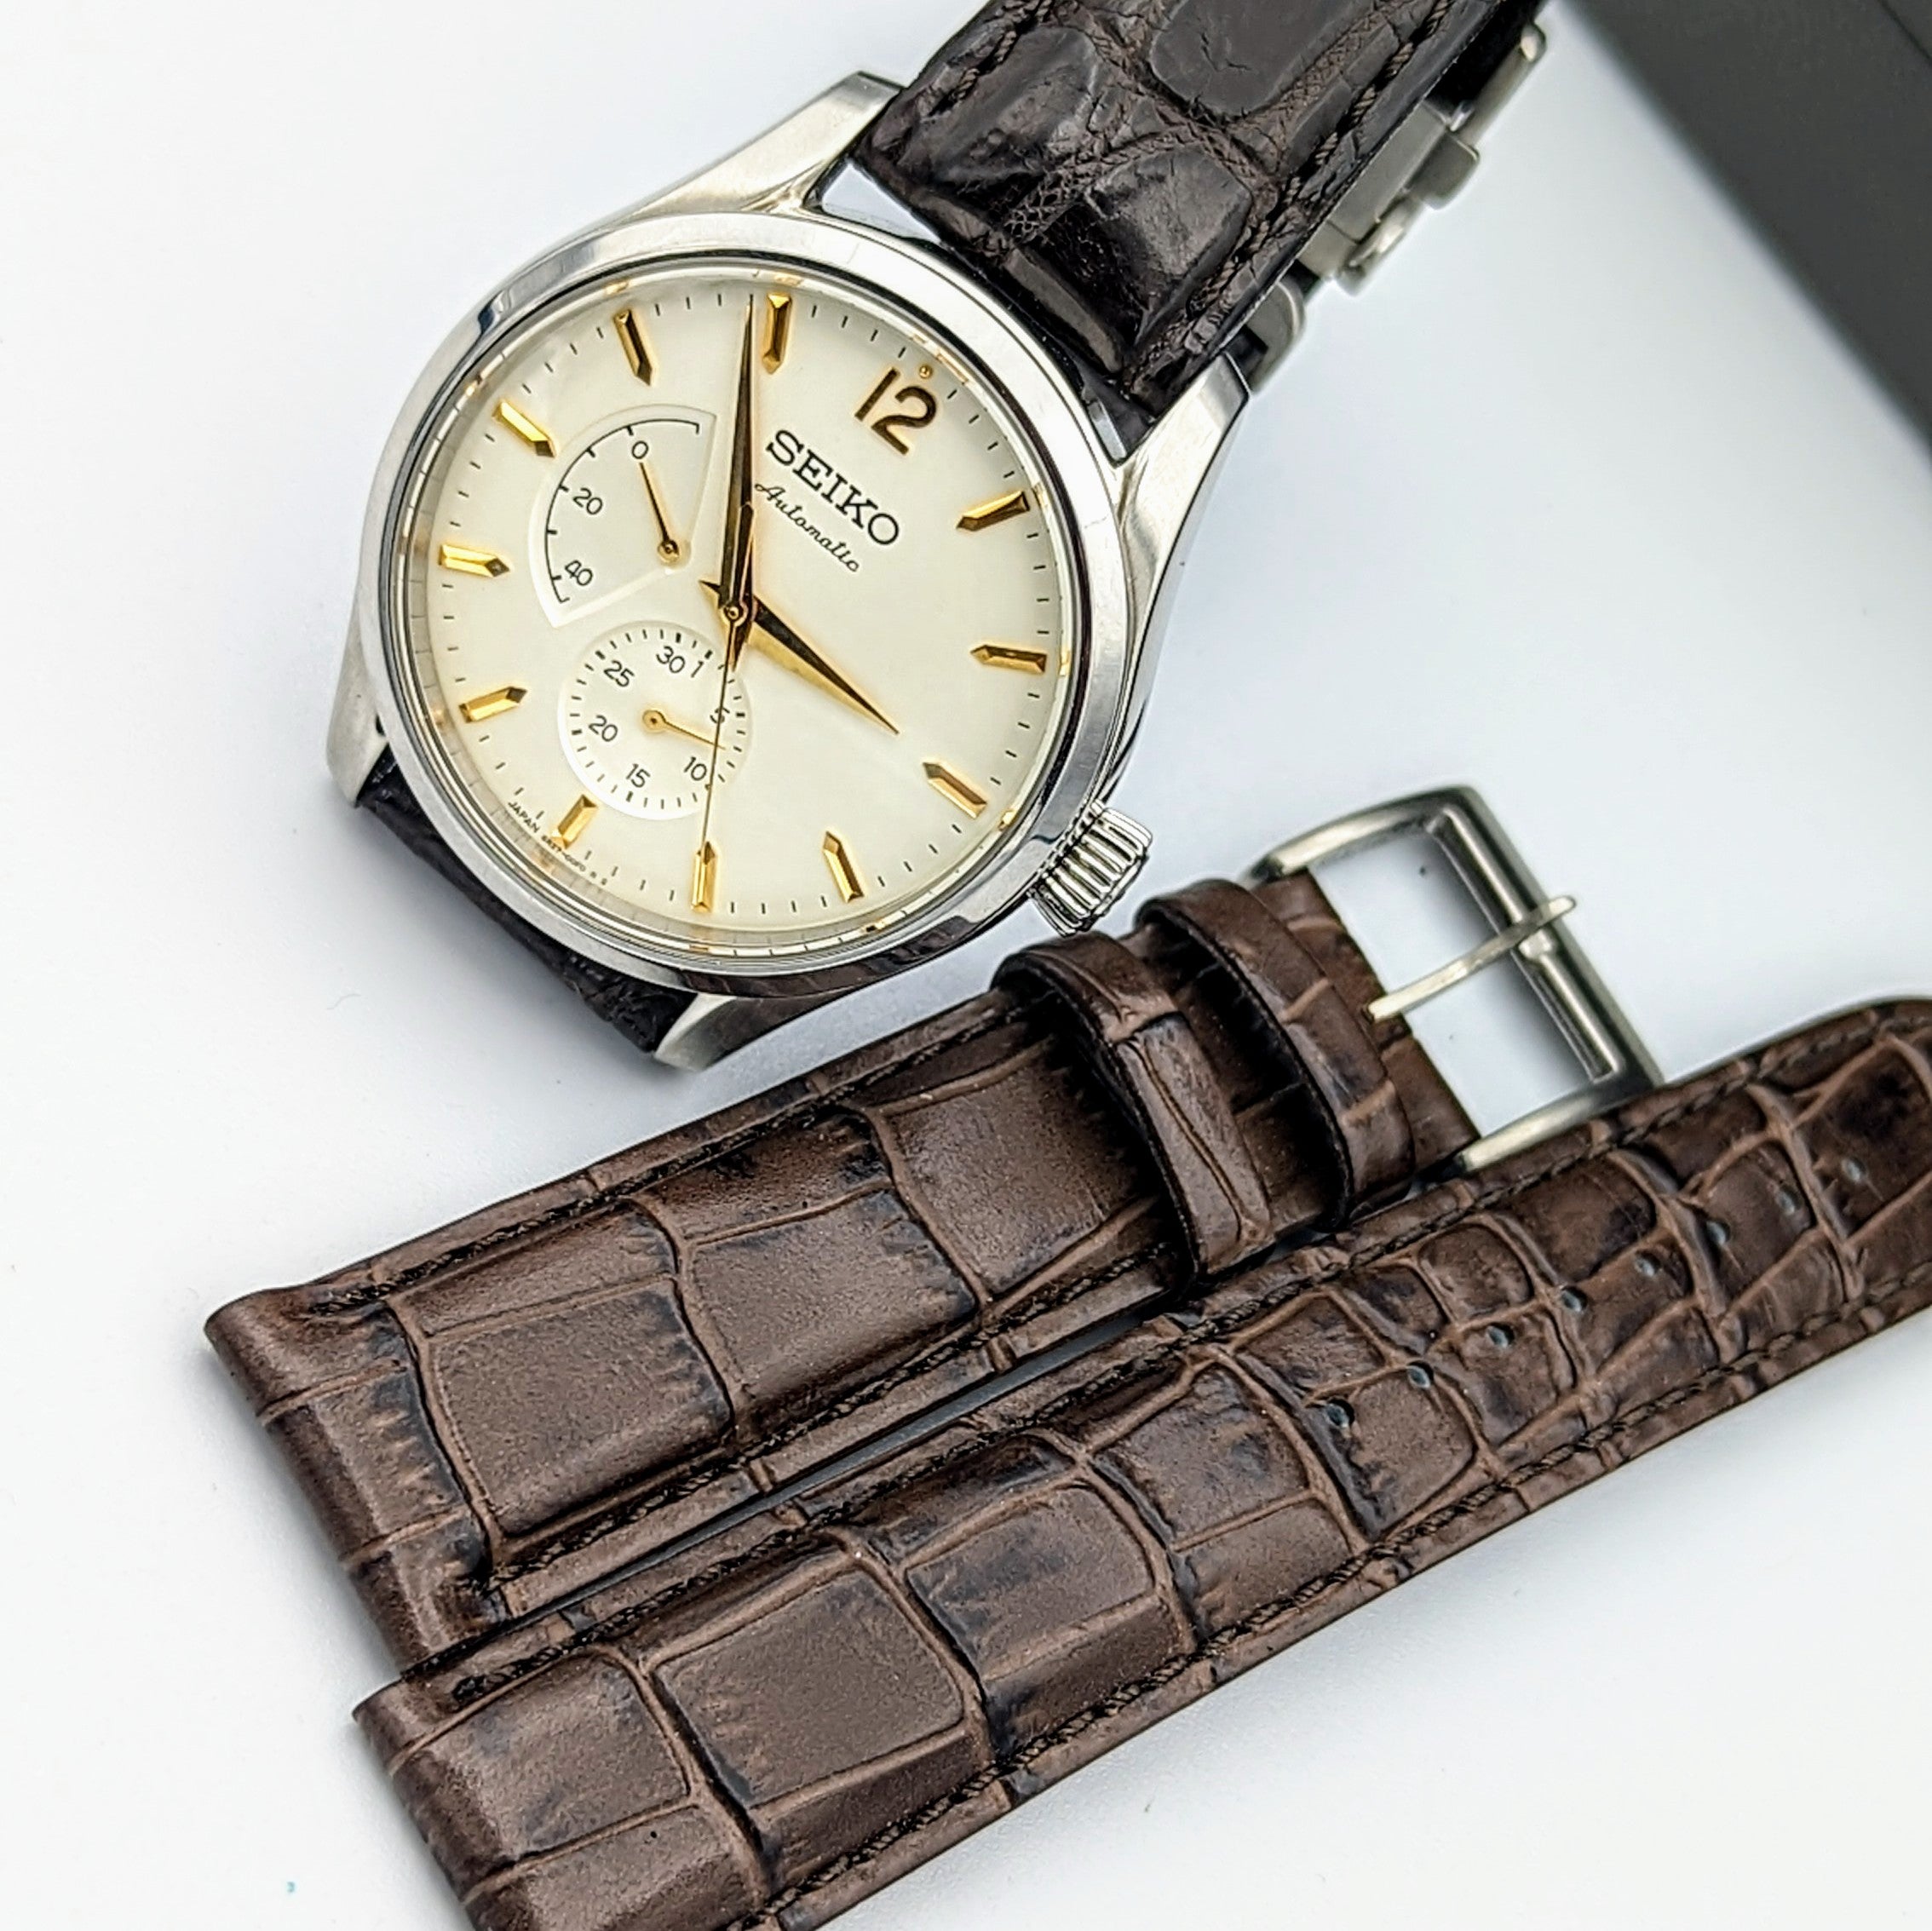 SEIKO Presage Automatic Watch 60TH Anniversary Limited Edition Wristwa –  SECOND HAND HOROLOGY